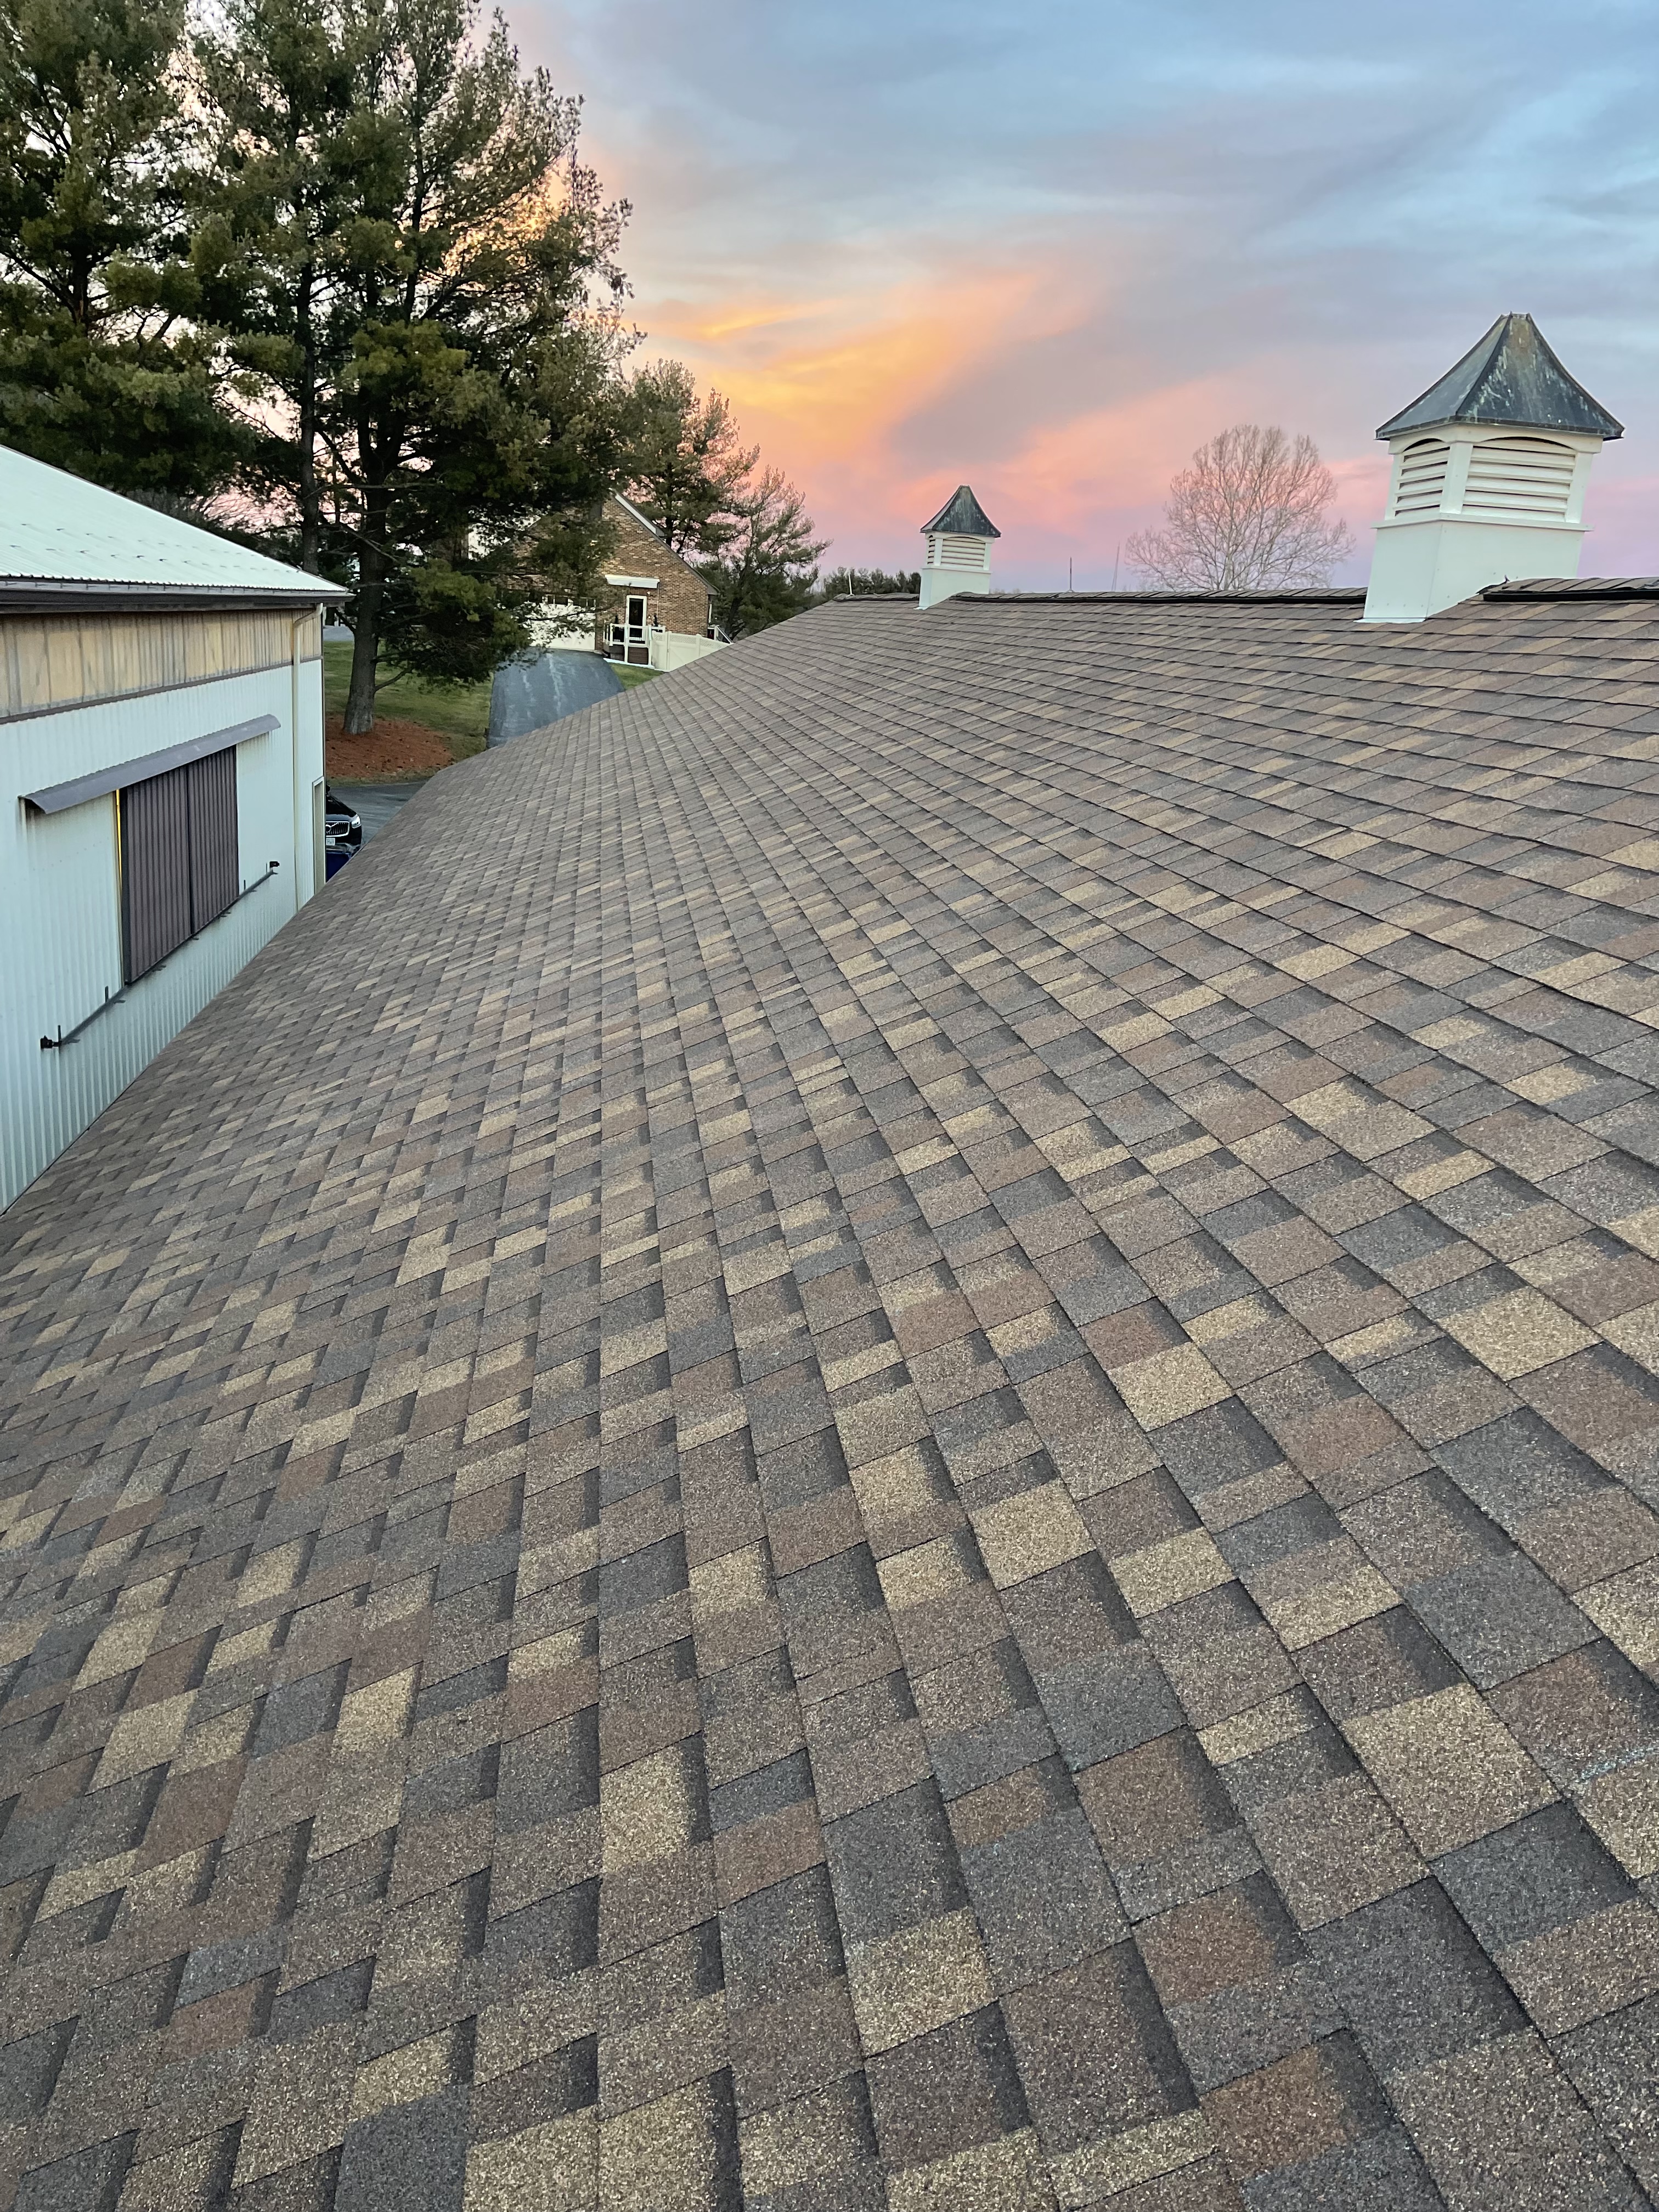 Spring Forward With a New Roof 